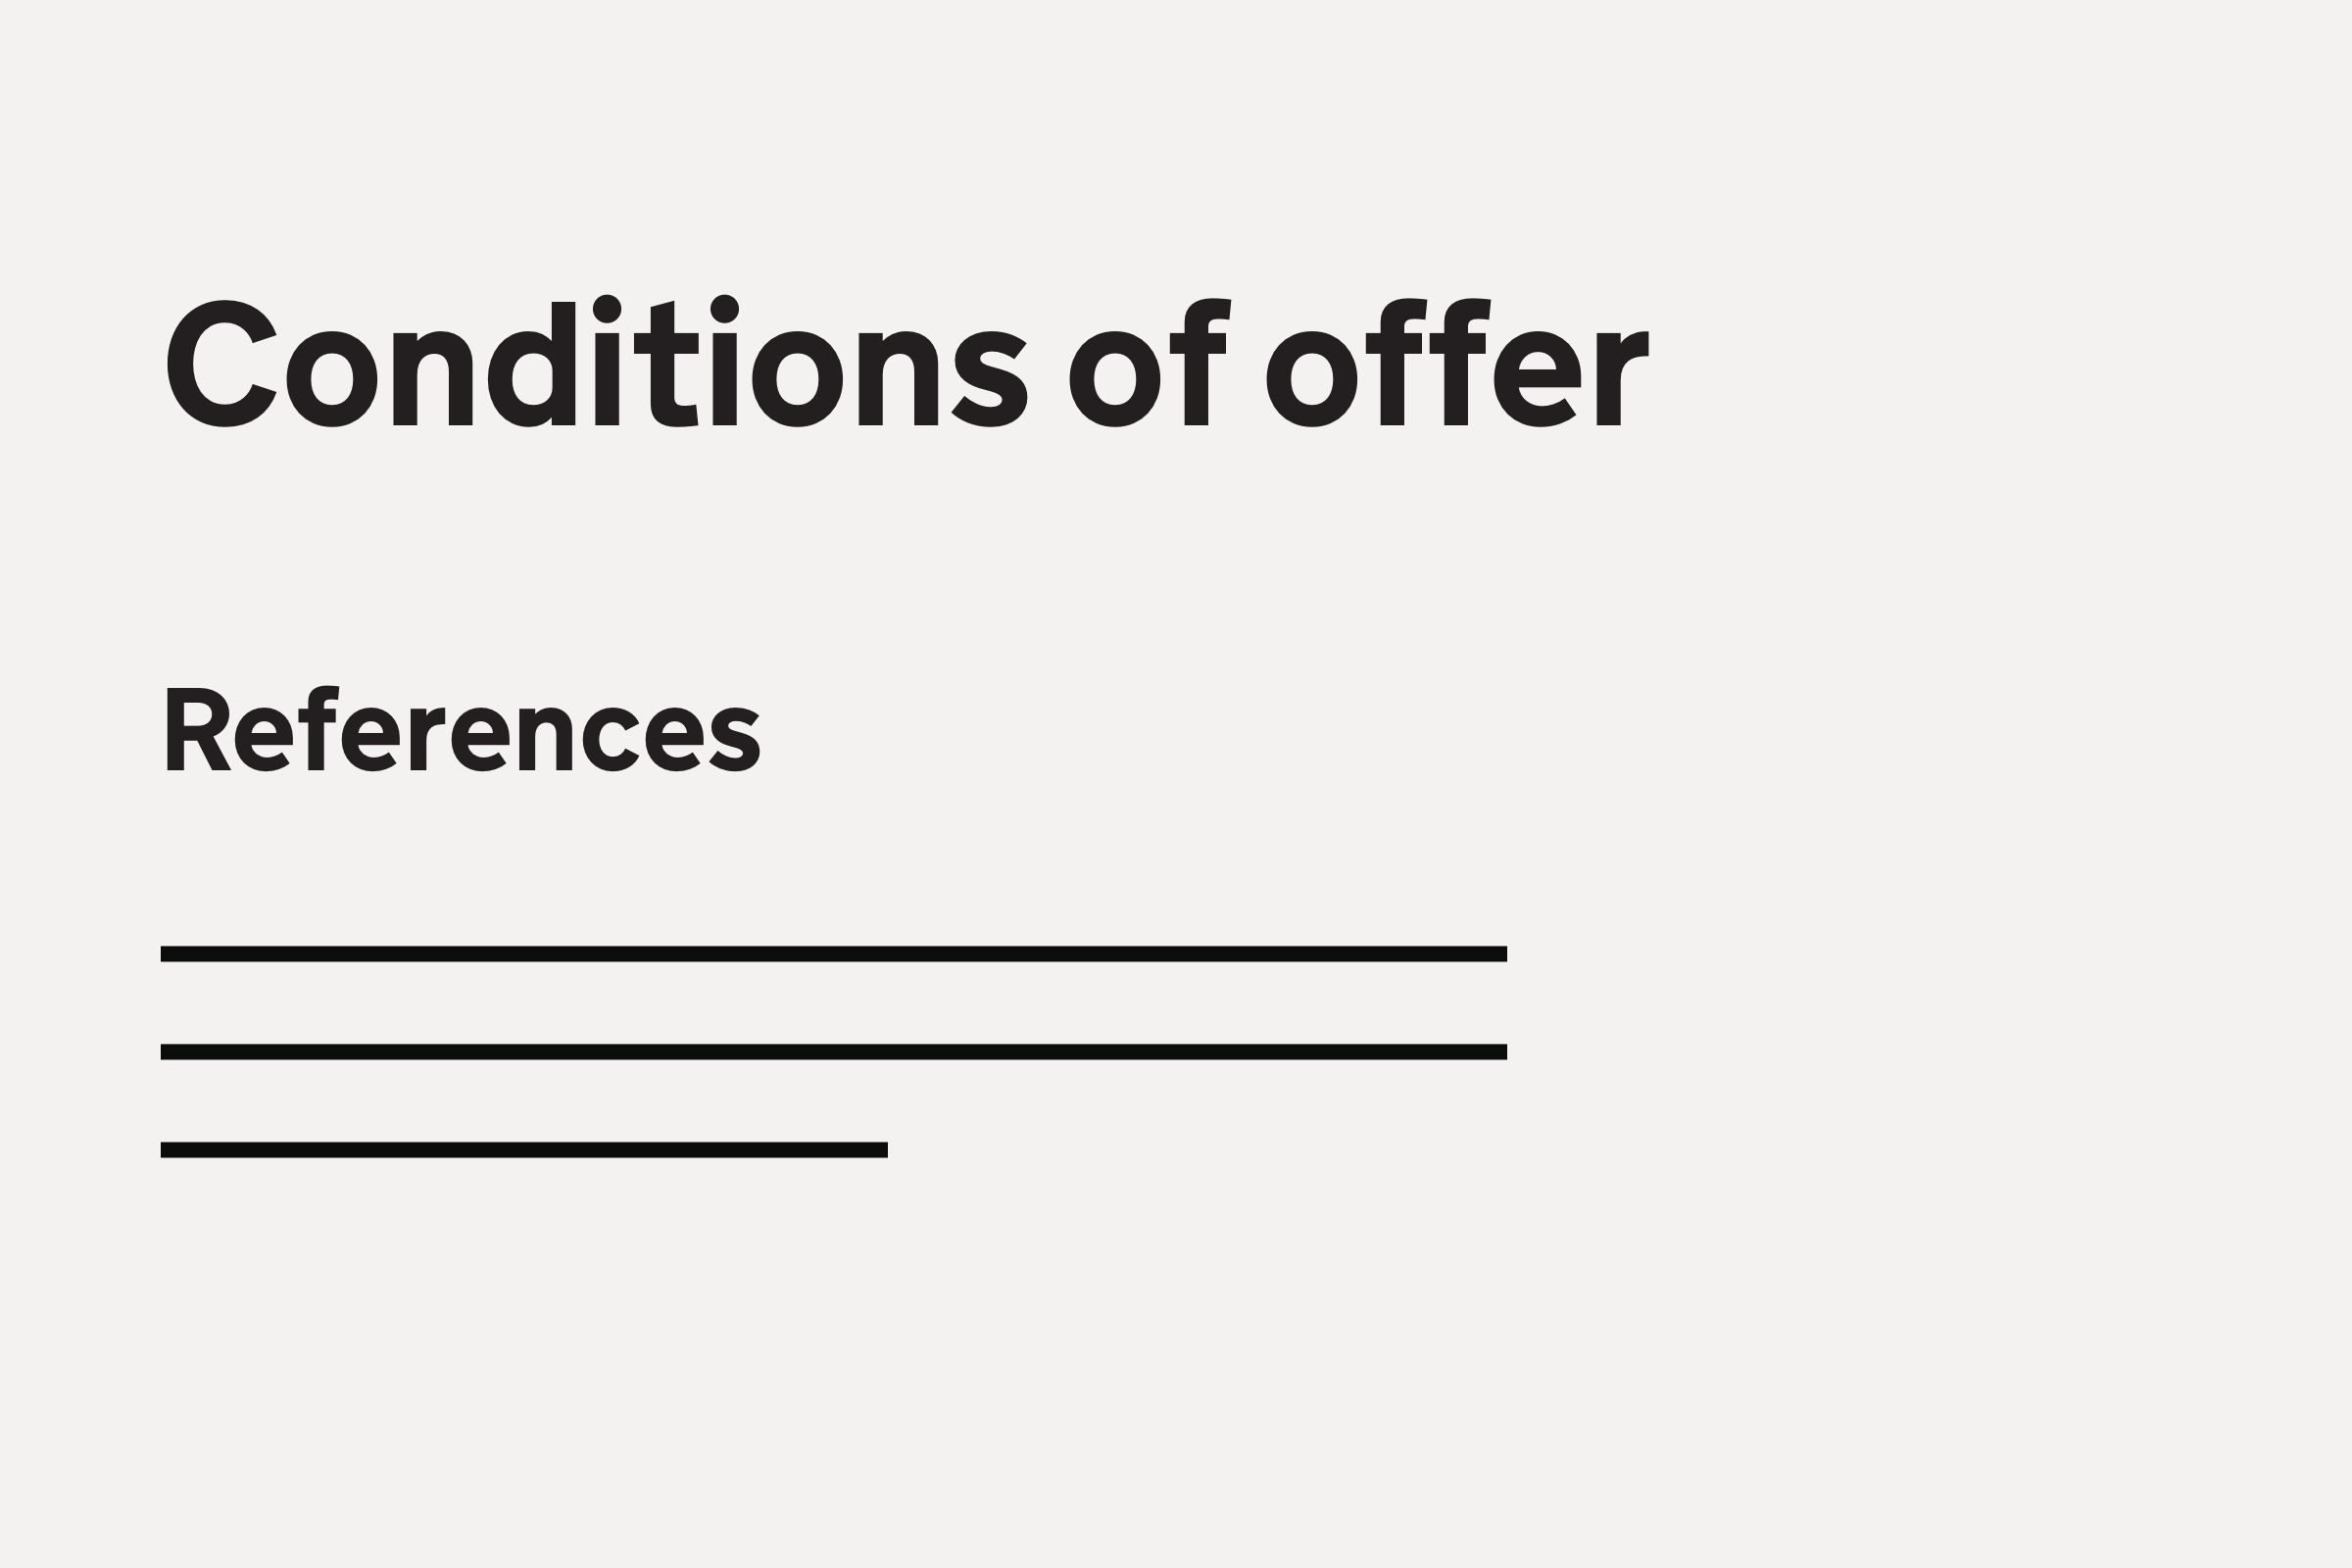 Illustration with the text: "Conditions of Offer: References"